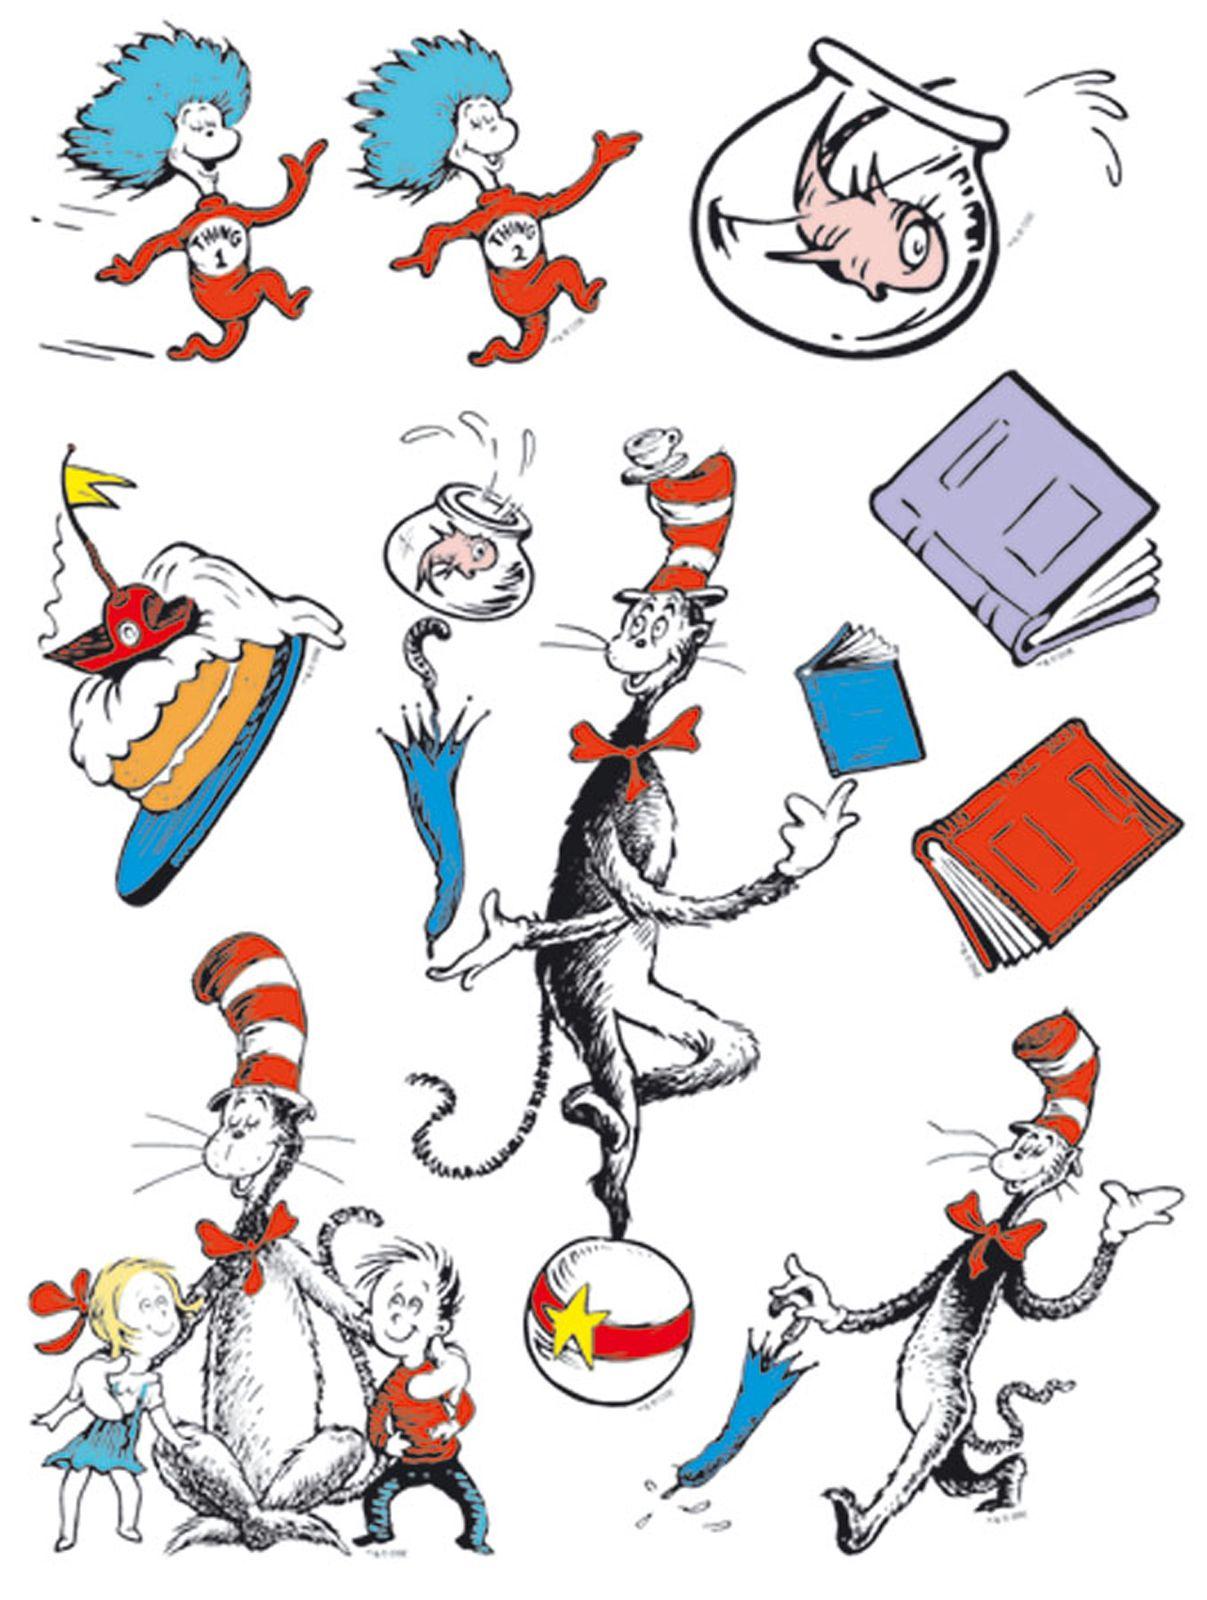 Dr. Seuss: The Cat In The Hat wallpaper, Video Game, HQ Dr. Seuss